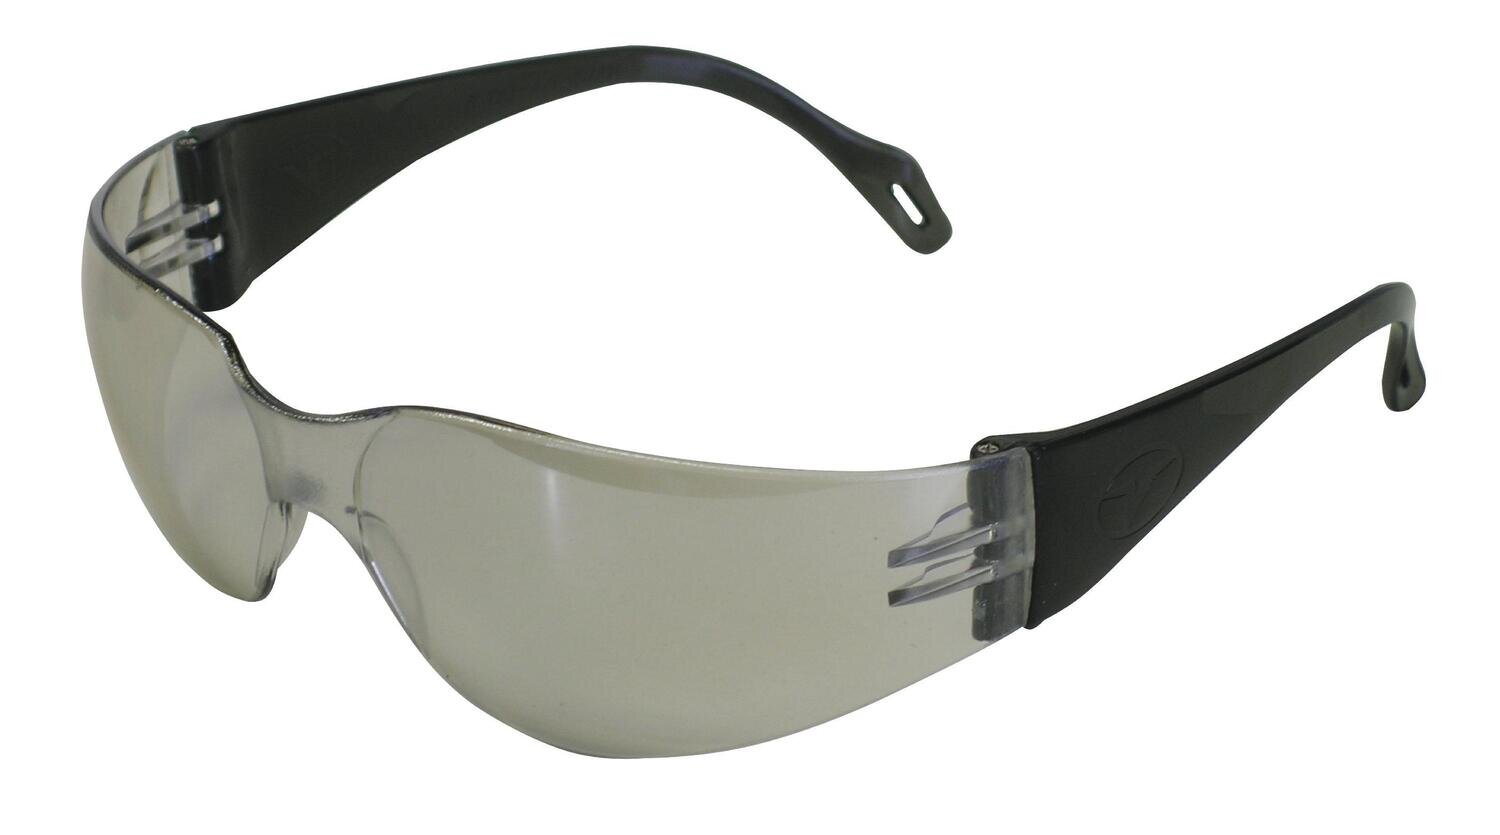 SGL5778774 - Veratti® 2000™ Safety Glasses - Gray Frame Indoor/Outdoor Lens